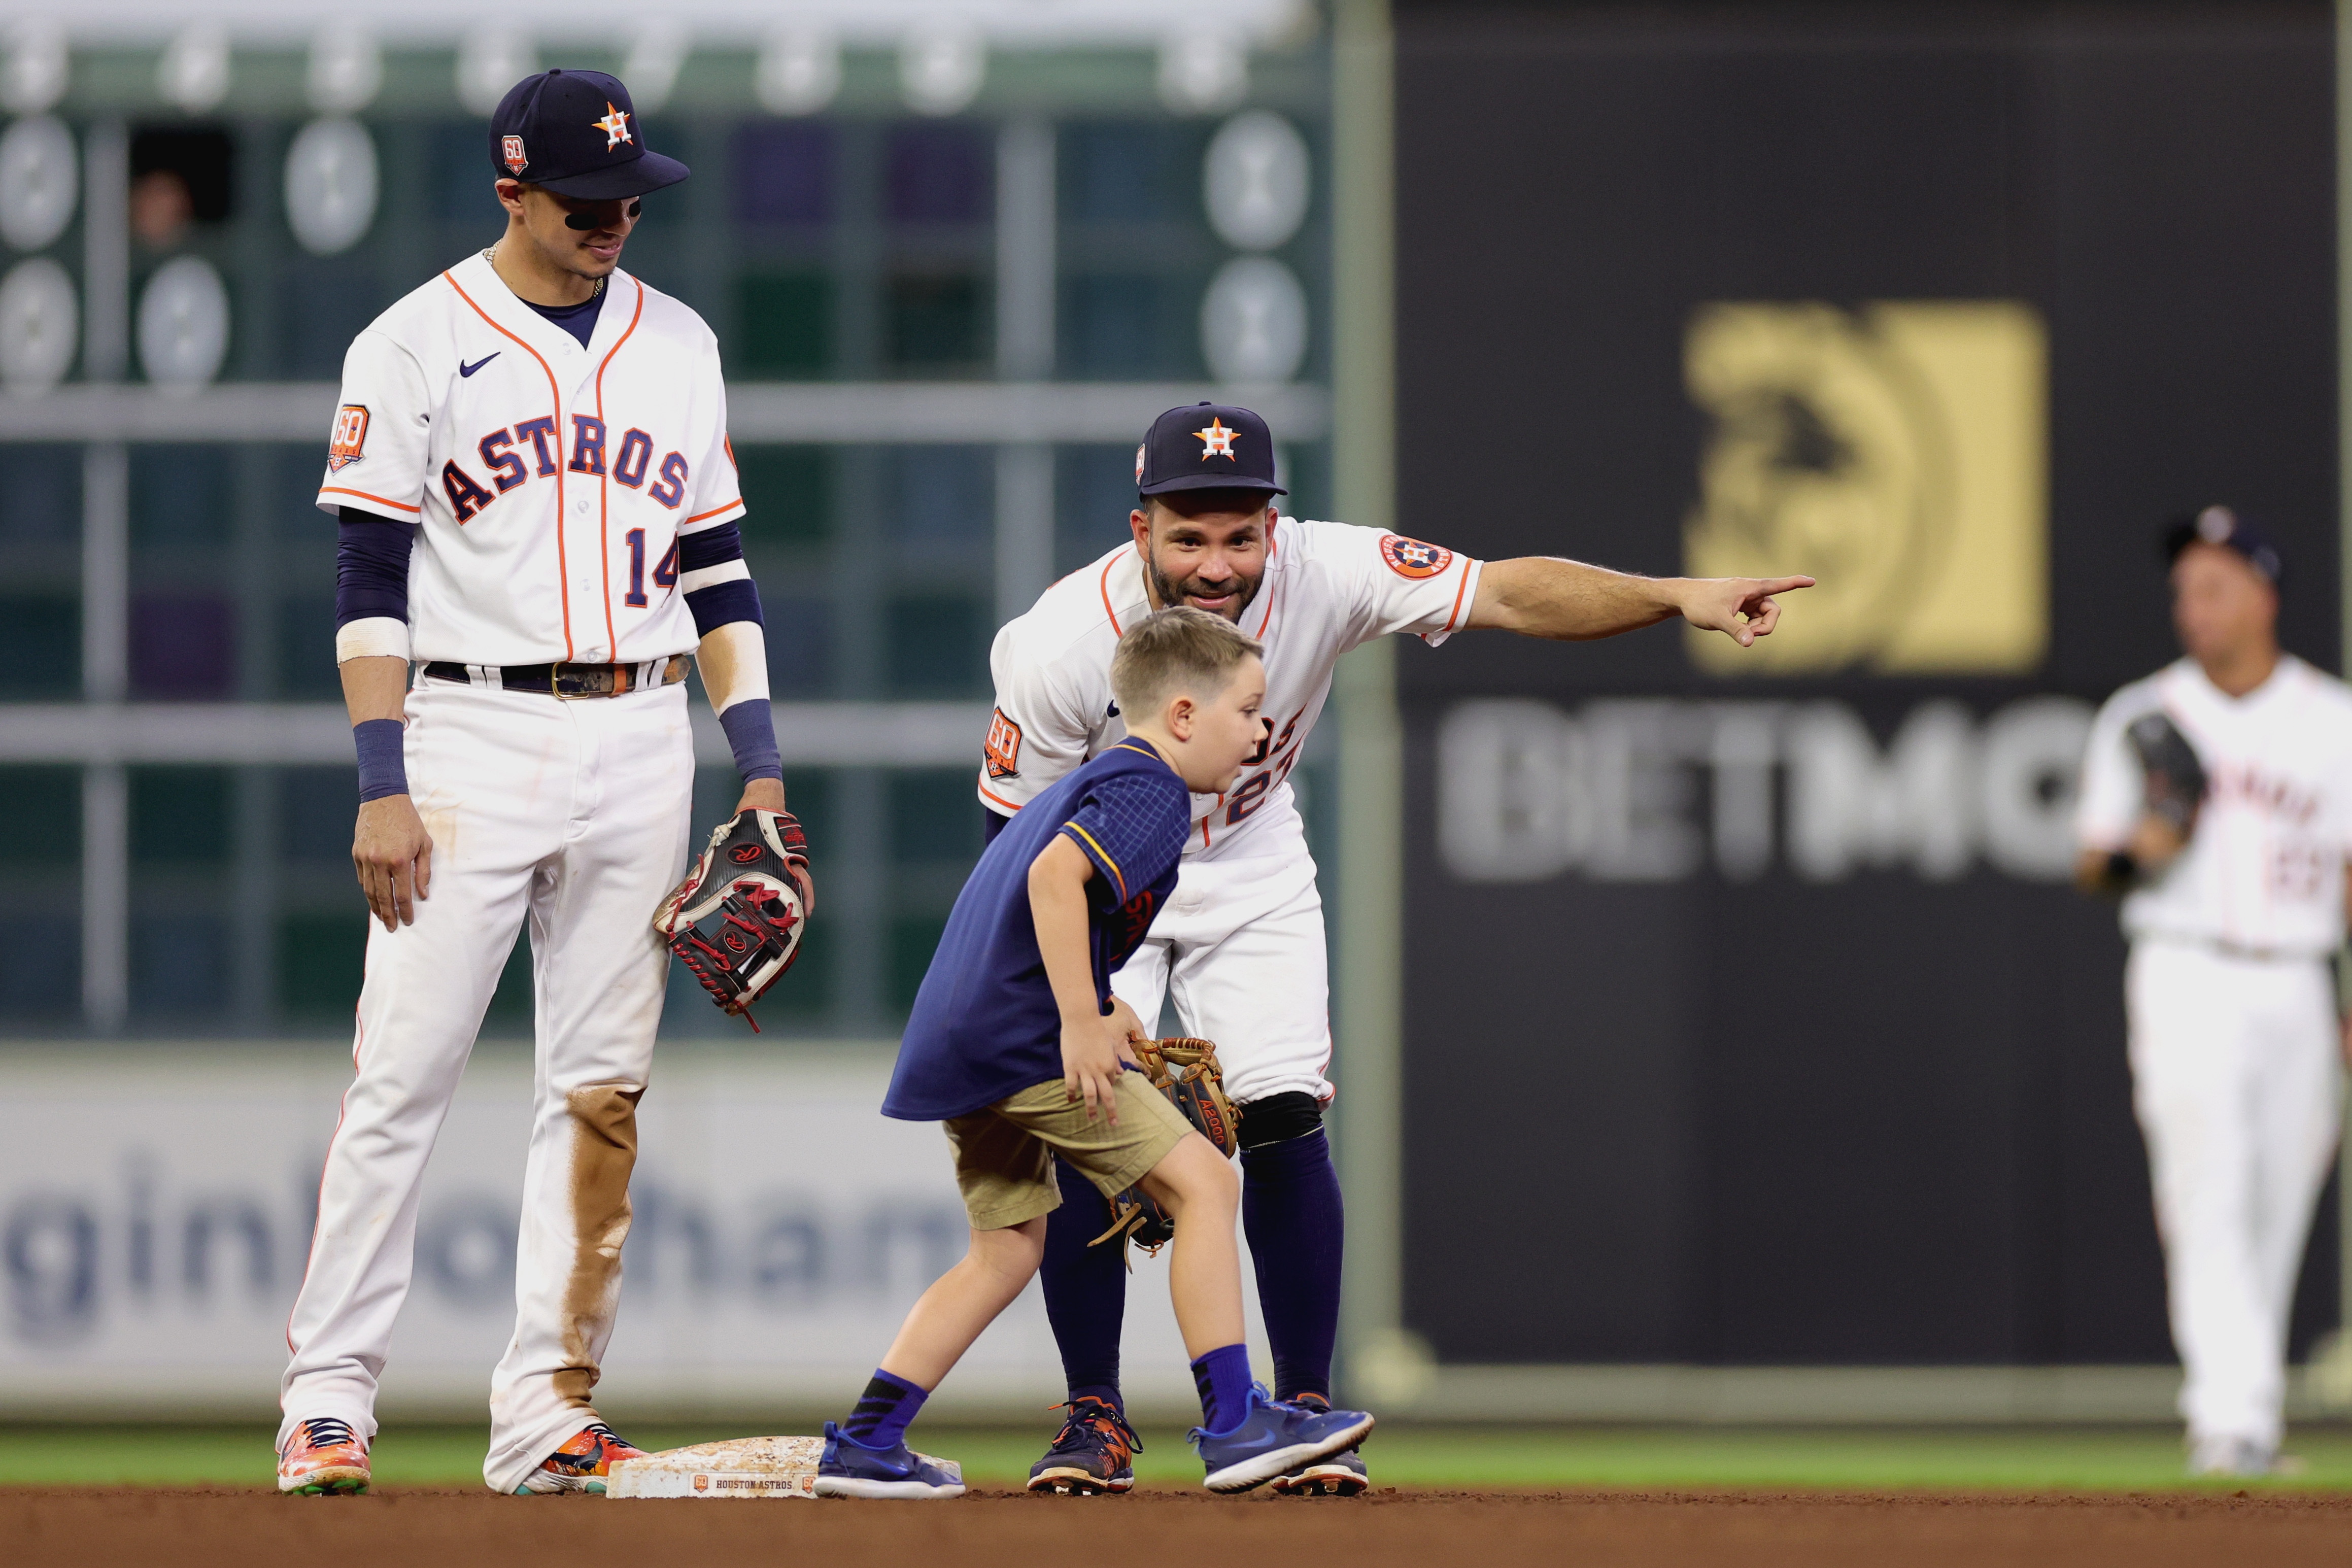 Cutest thing ever': Boy's base-stealing effort at Astros game